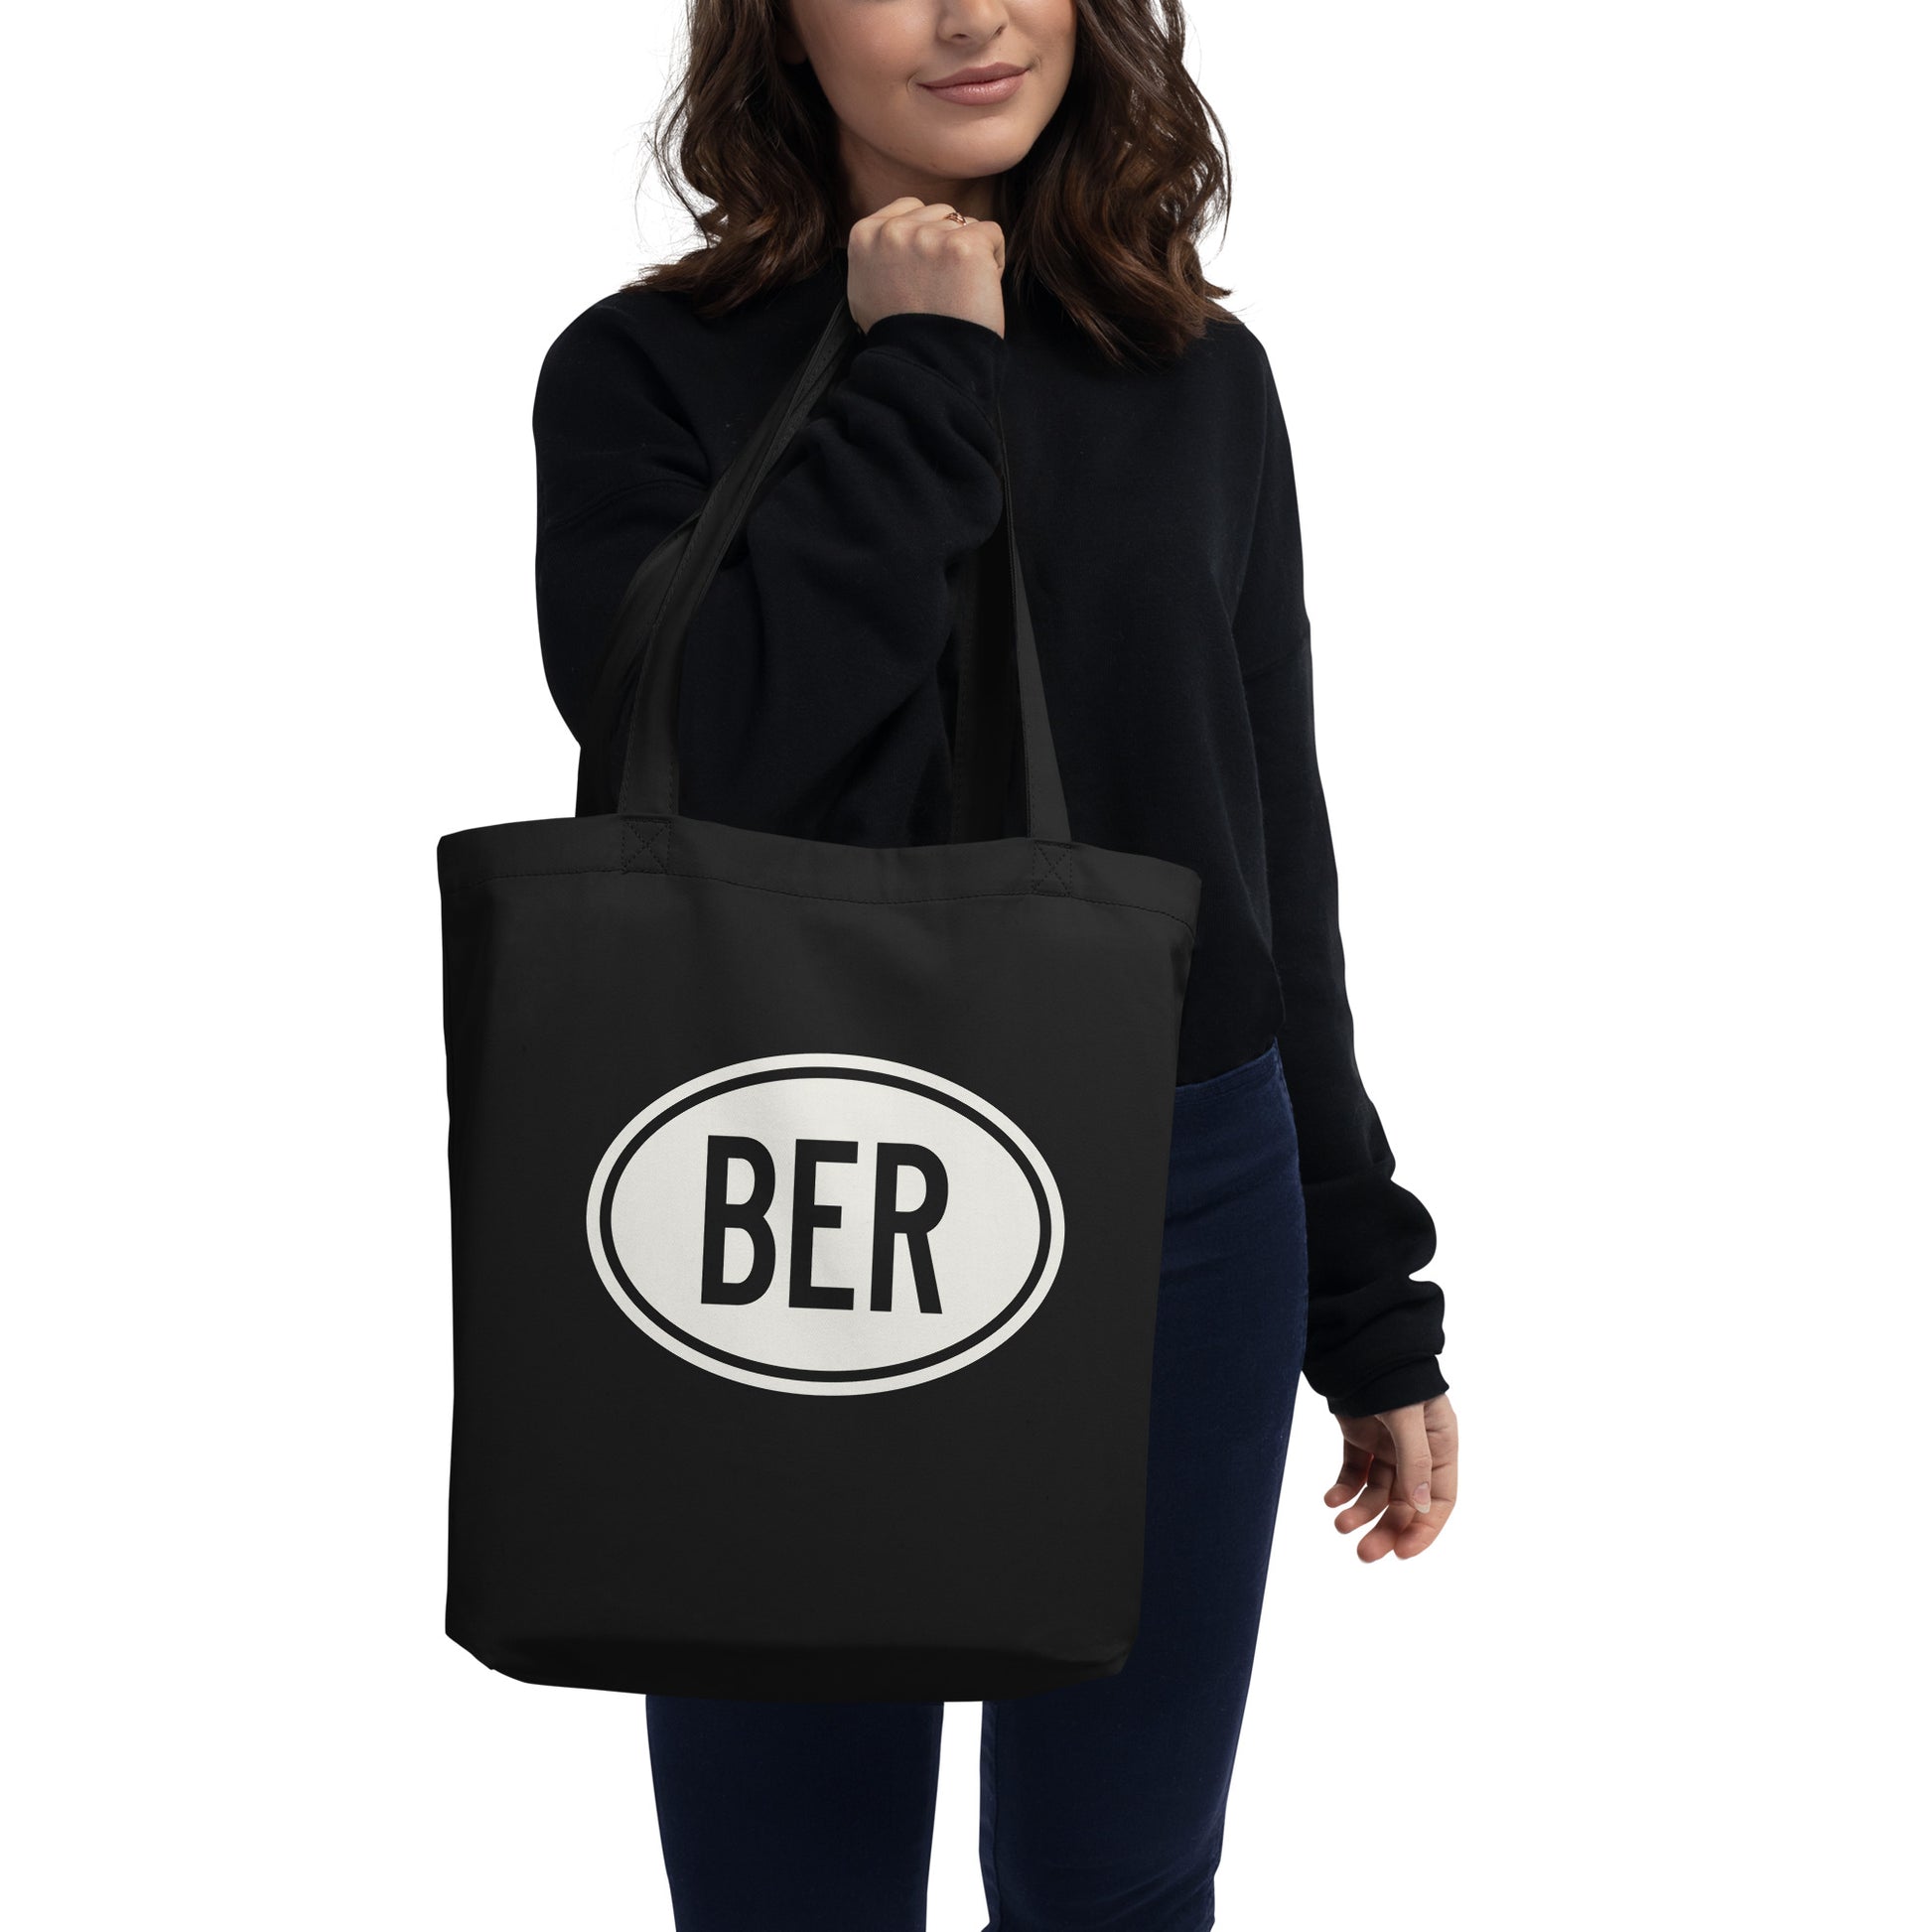 Unique Travel Gift Organic Tote - White Oval • BER Berlin • YHM Designs - Image 03